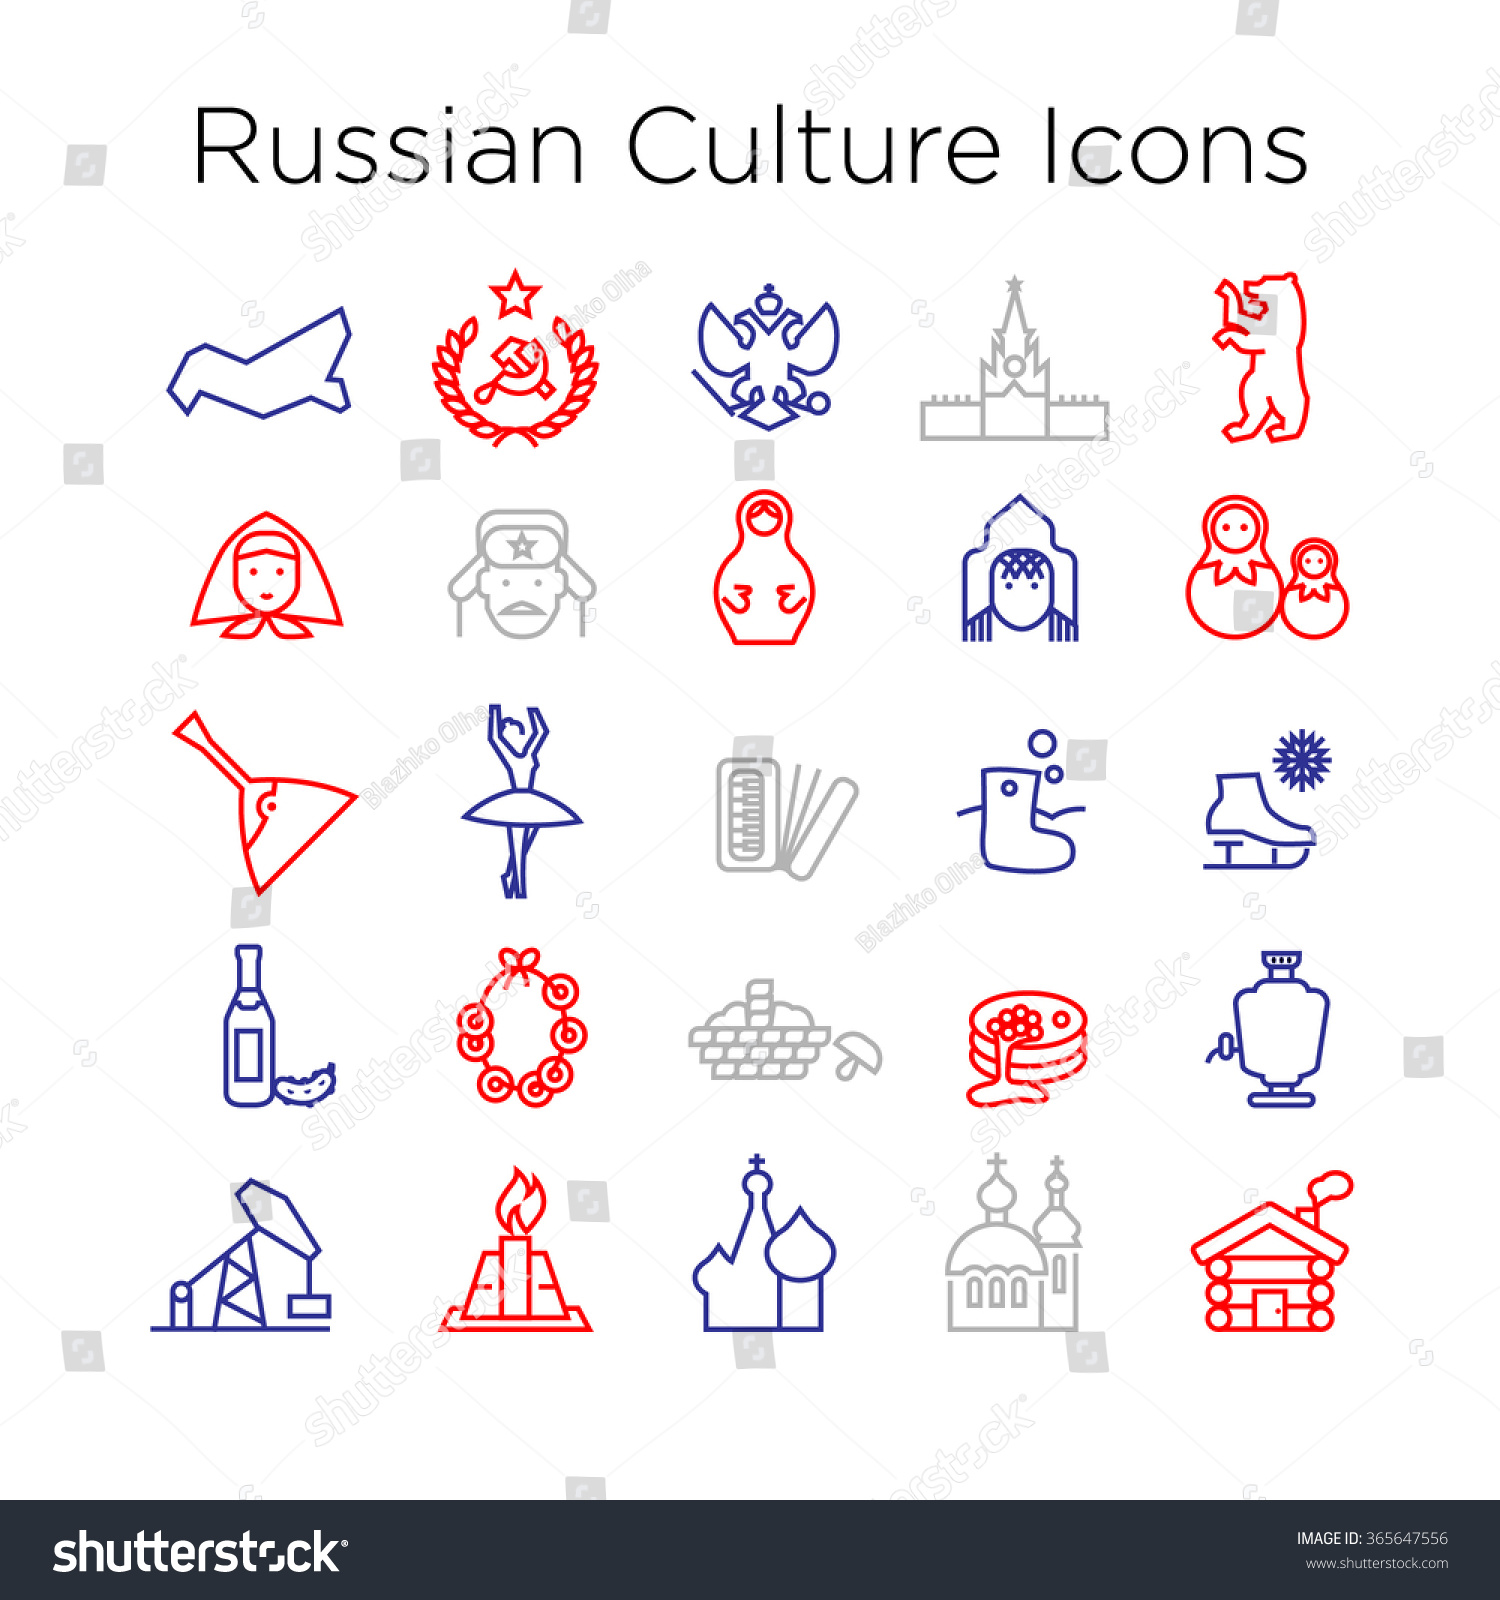 Russian Culture Have Produced 107